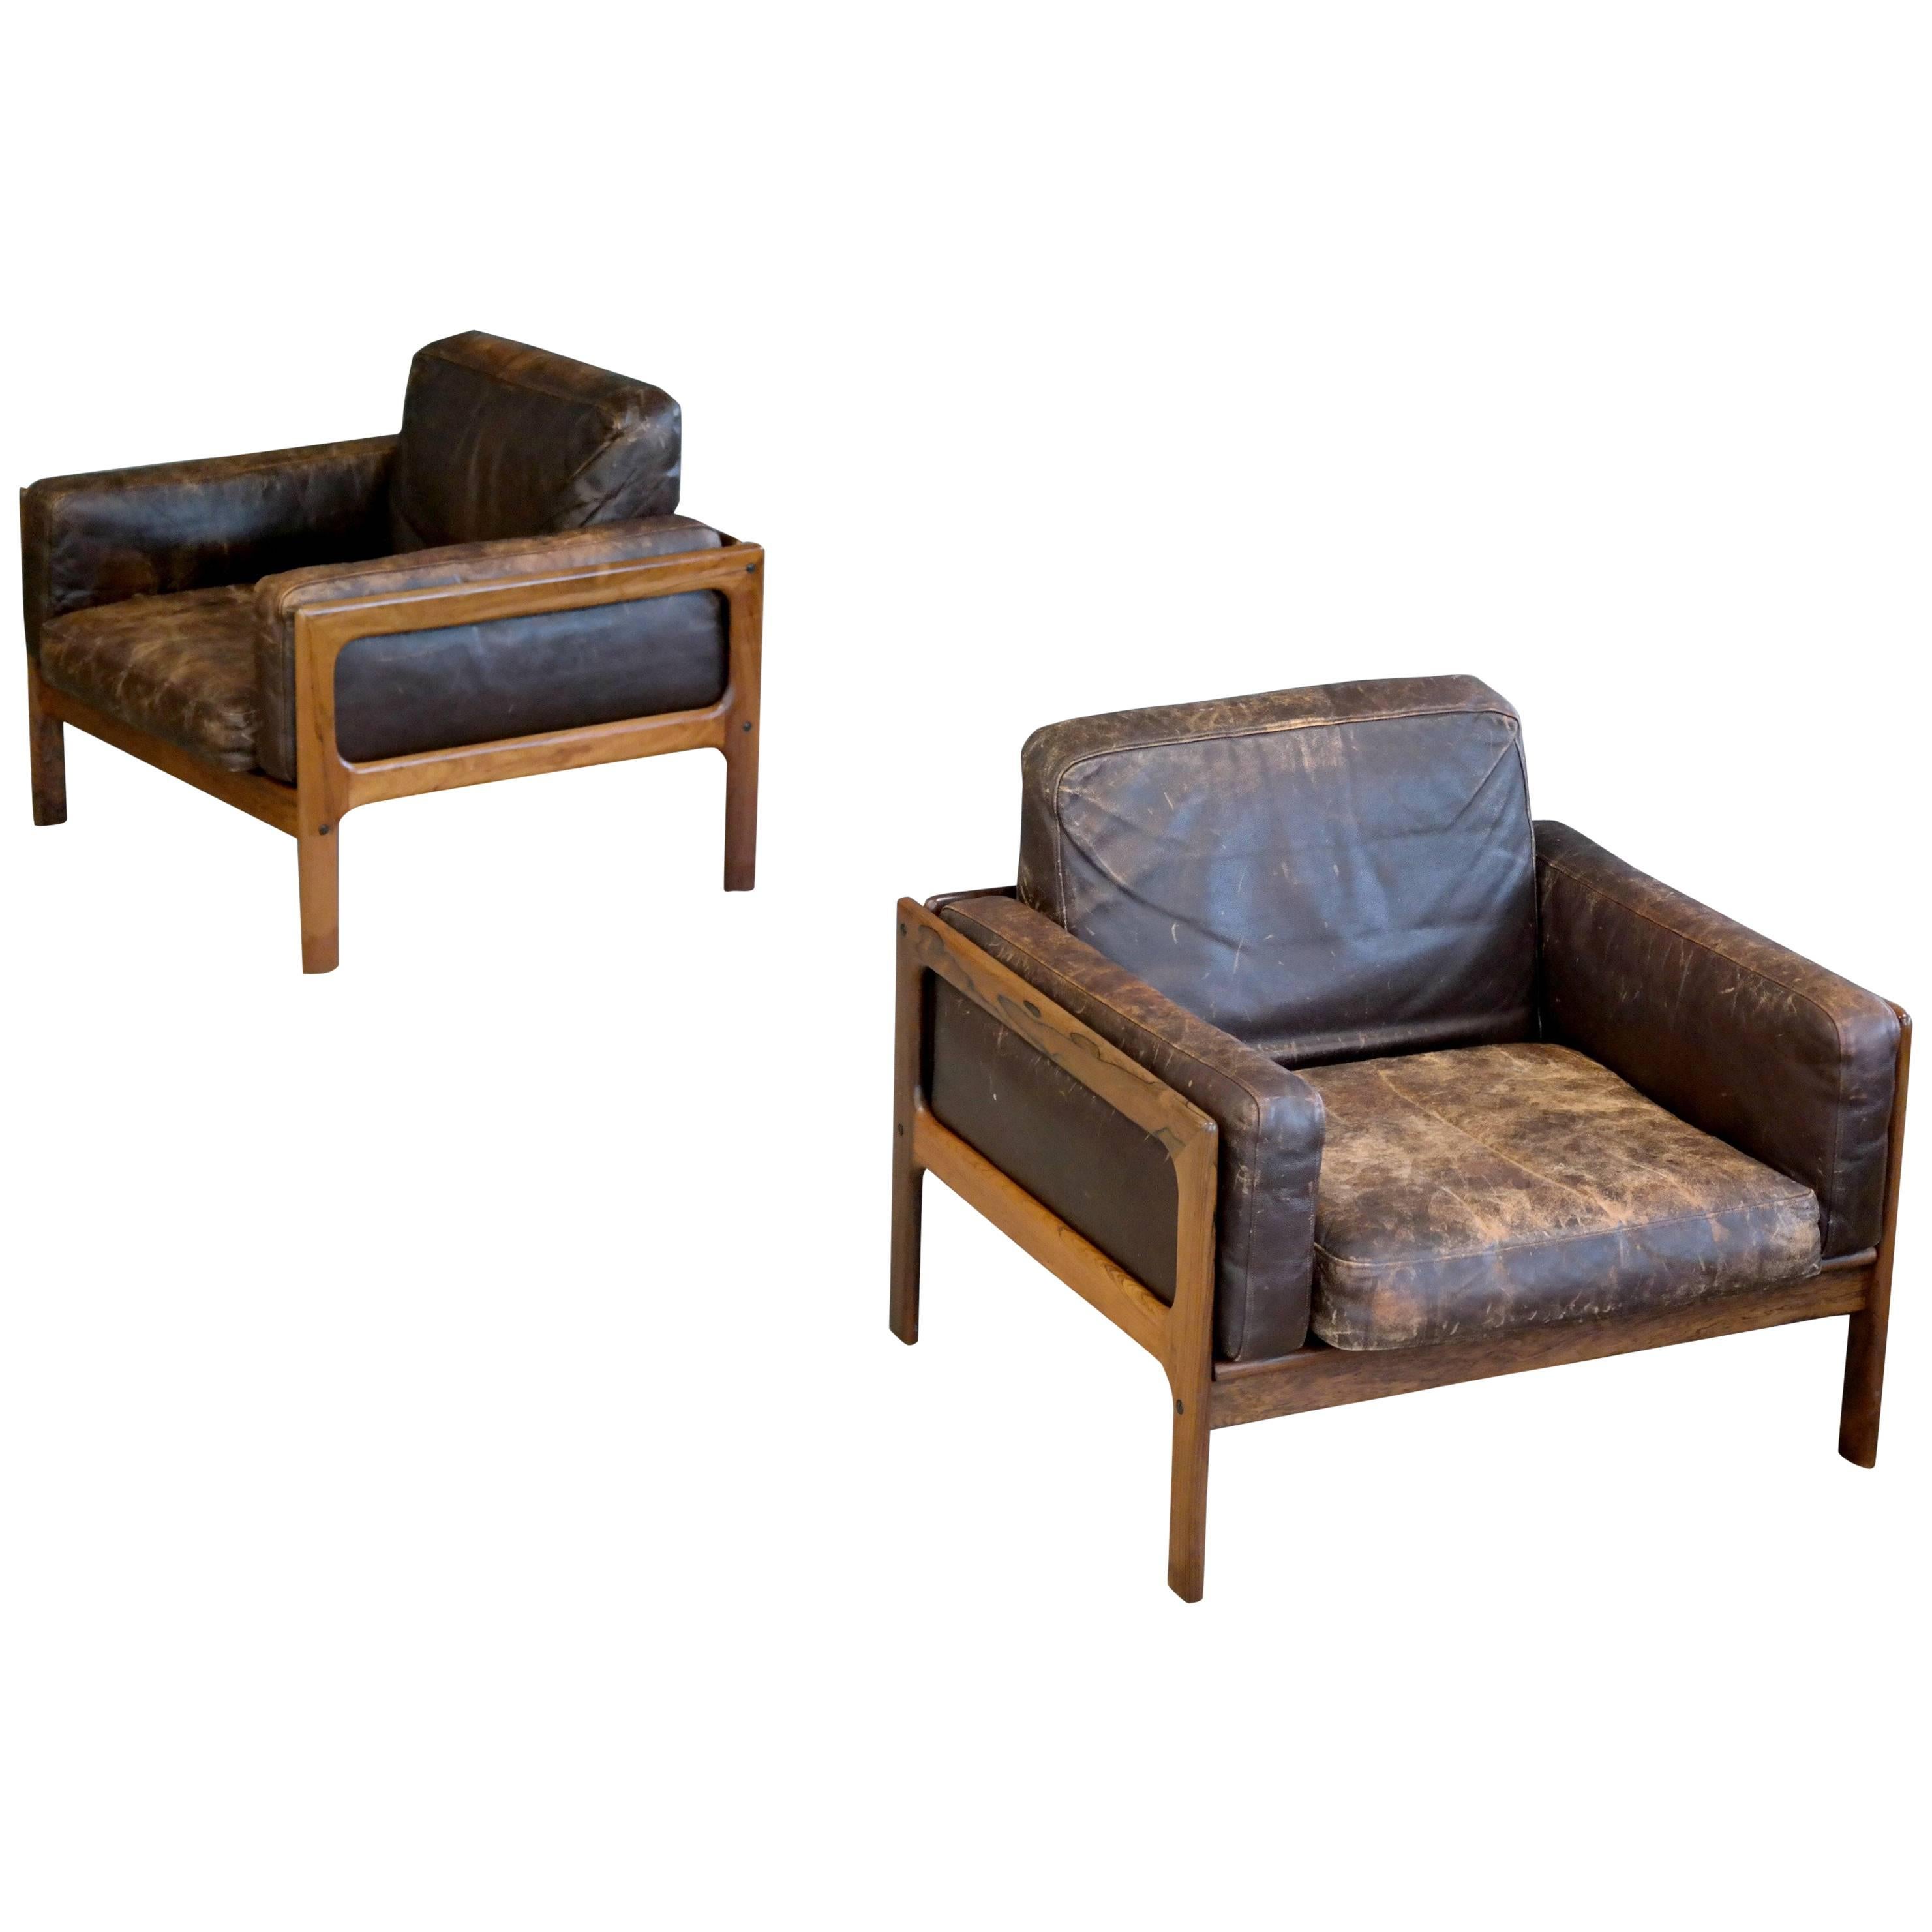 Arne Wahl Iversen Pair of Easy Chairs in Rosewood and Leather for Komfort Mobler